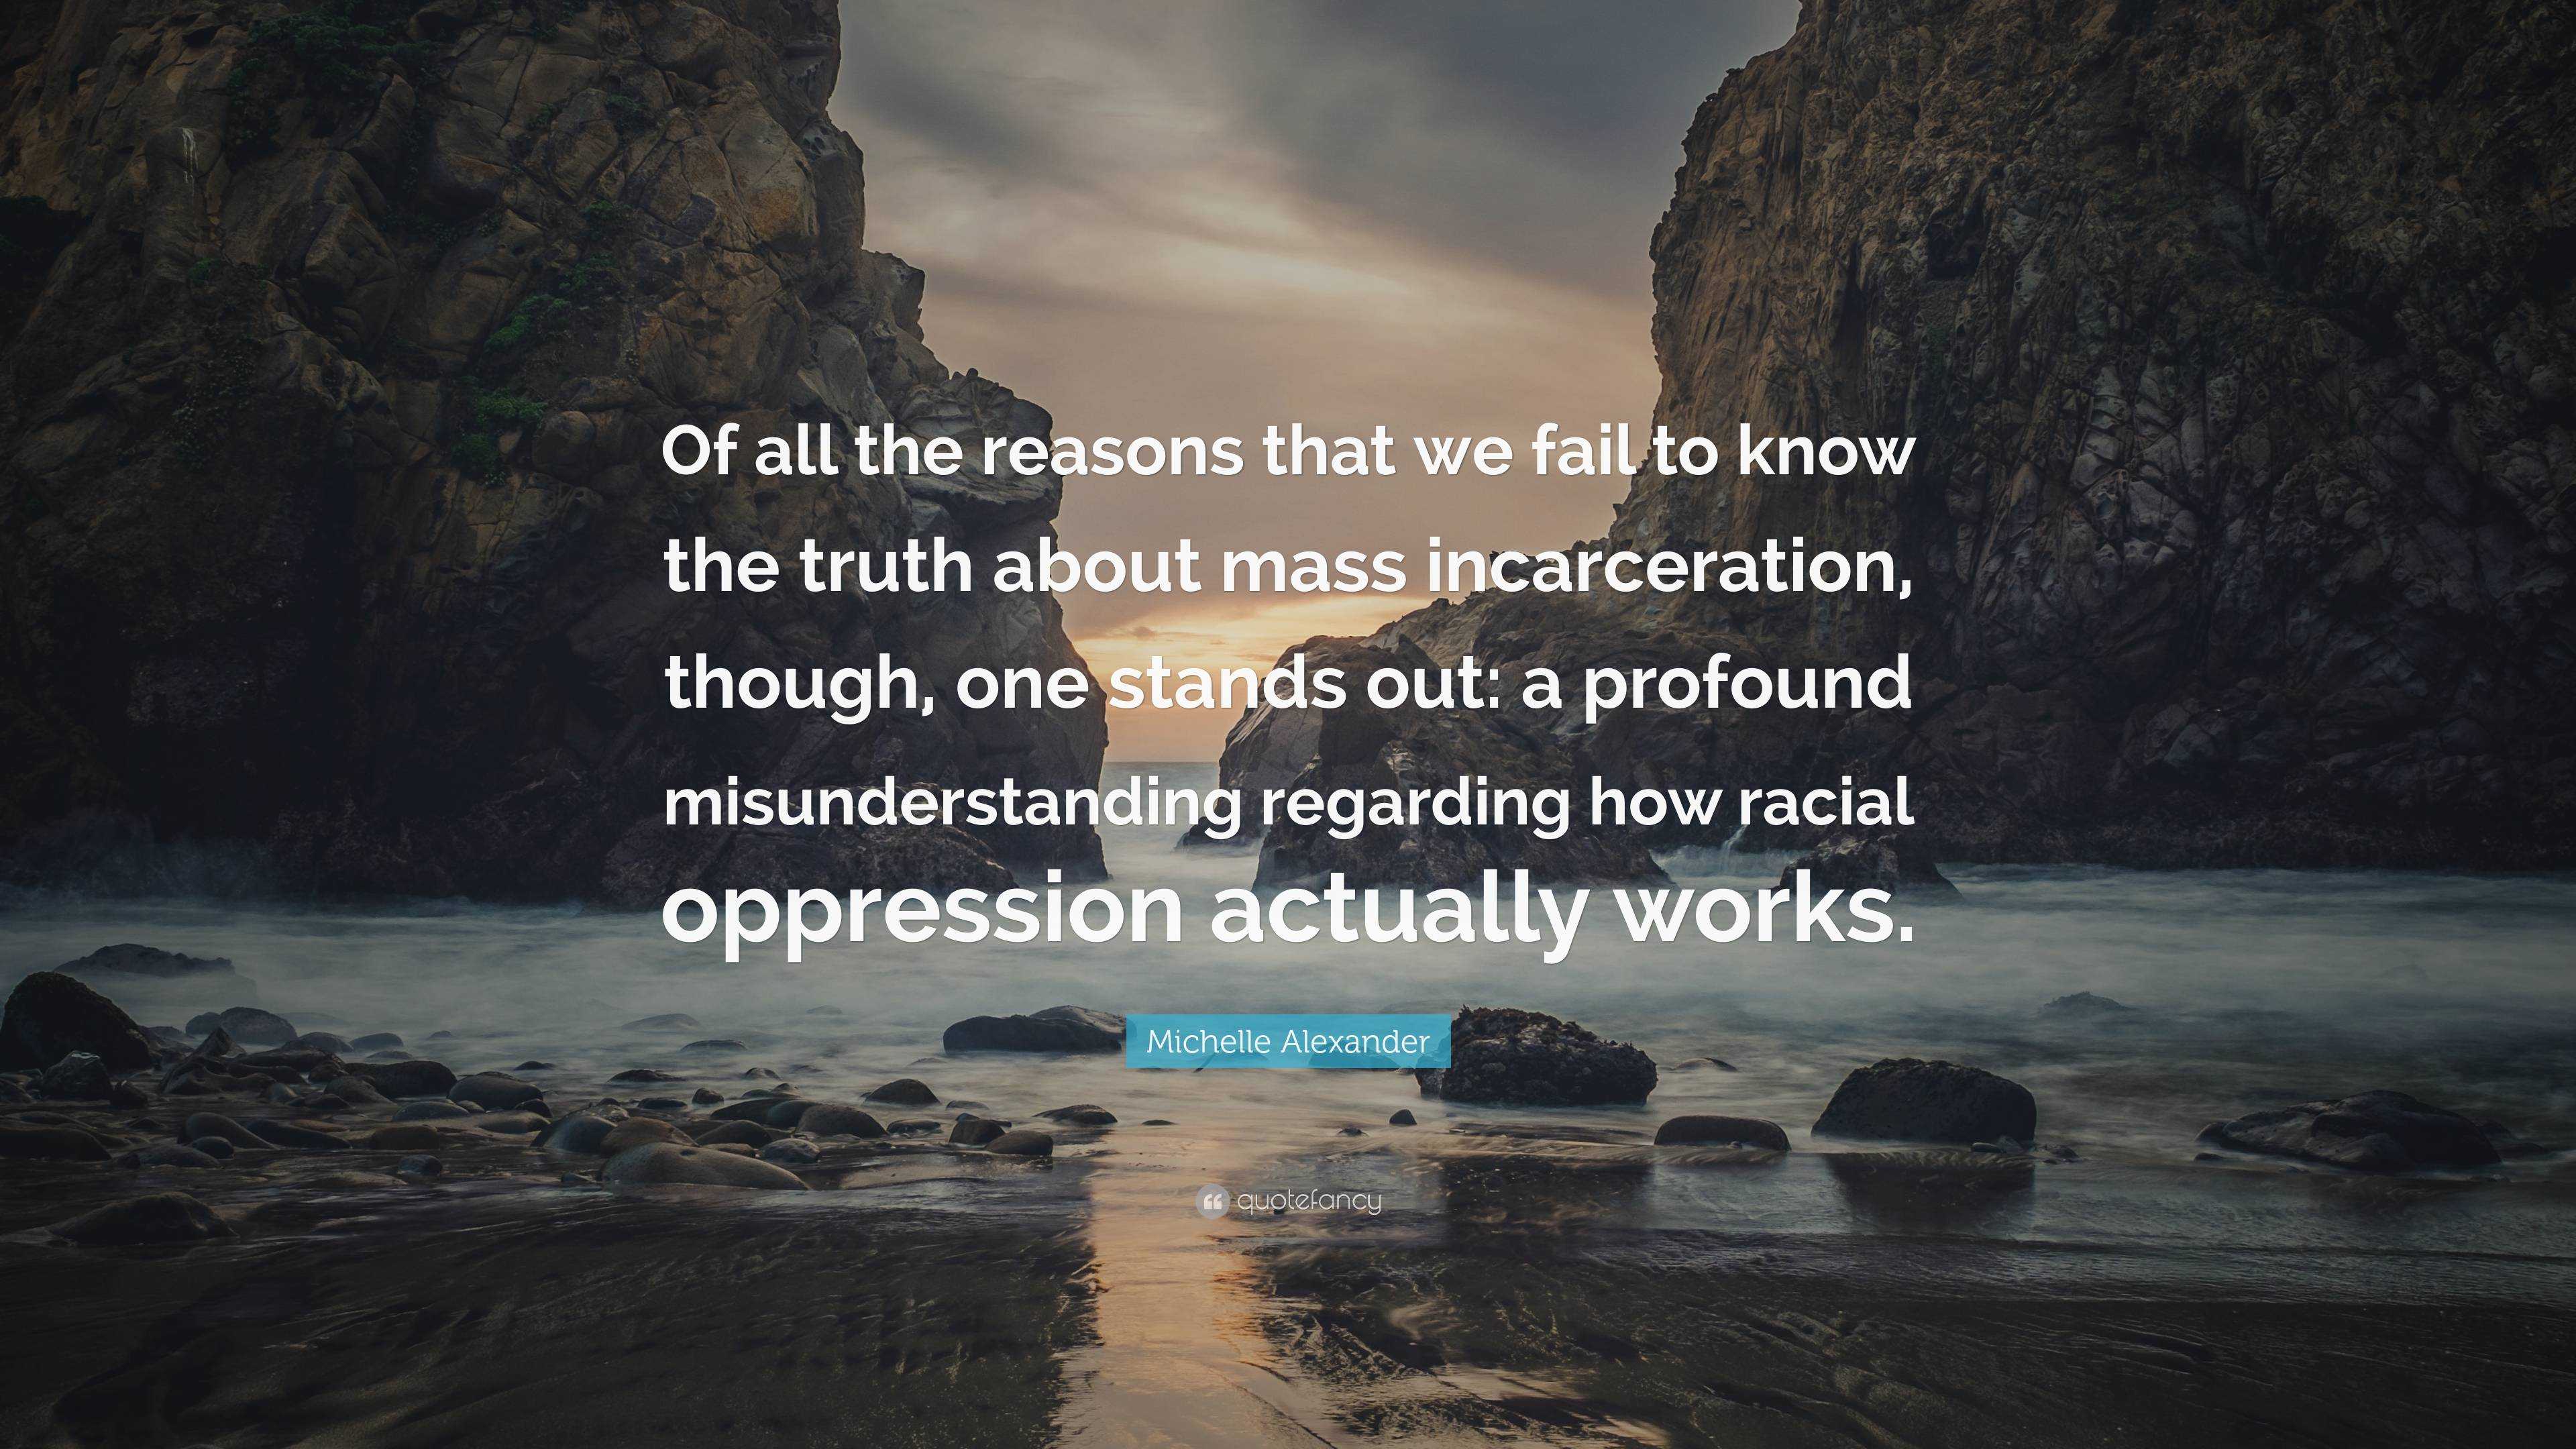 Michelle Alexander Quote “of All The Reasons That We Fail To Know The Truth About Mass 